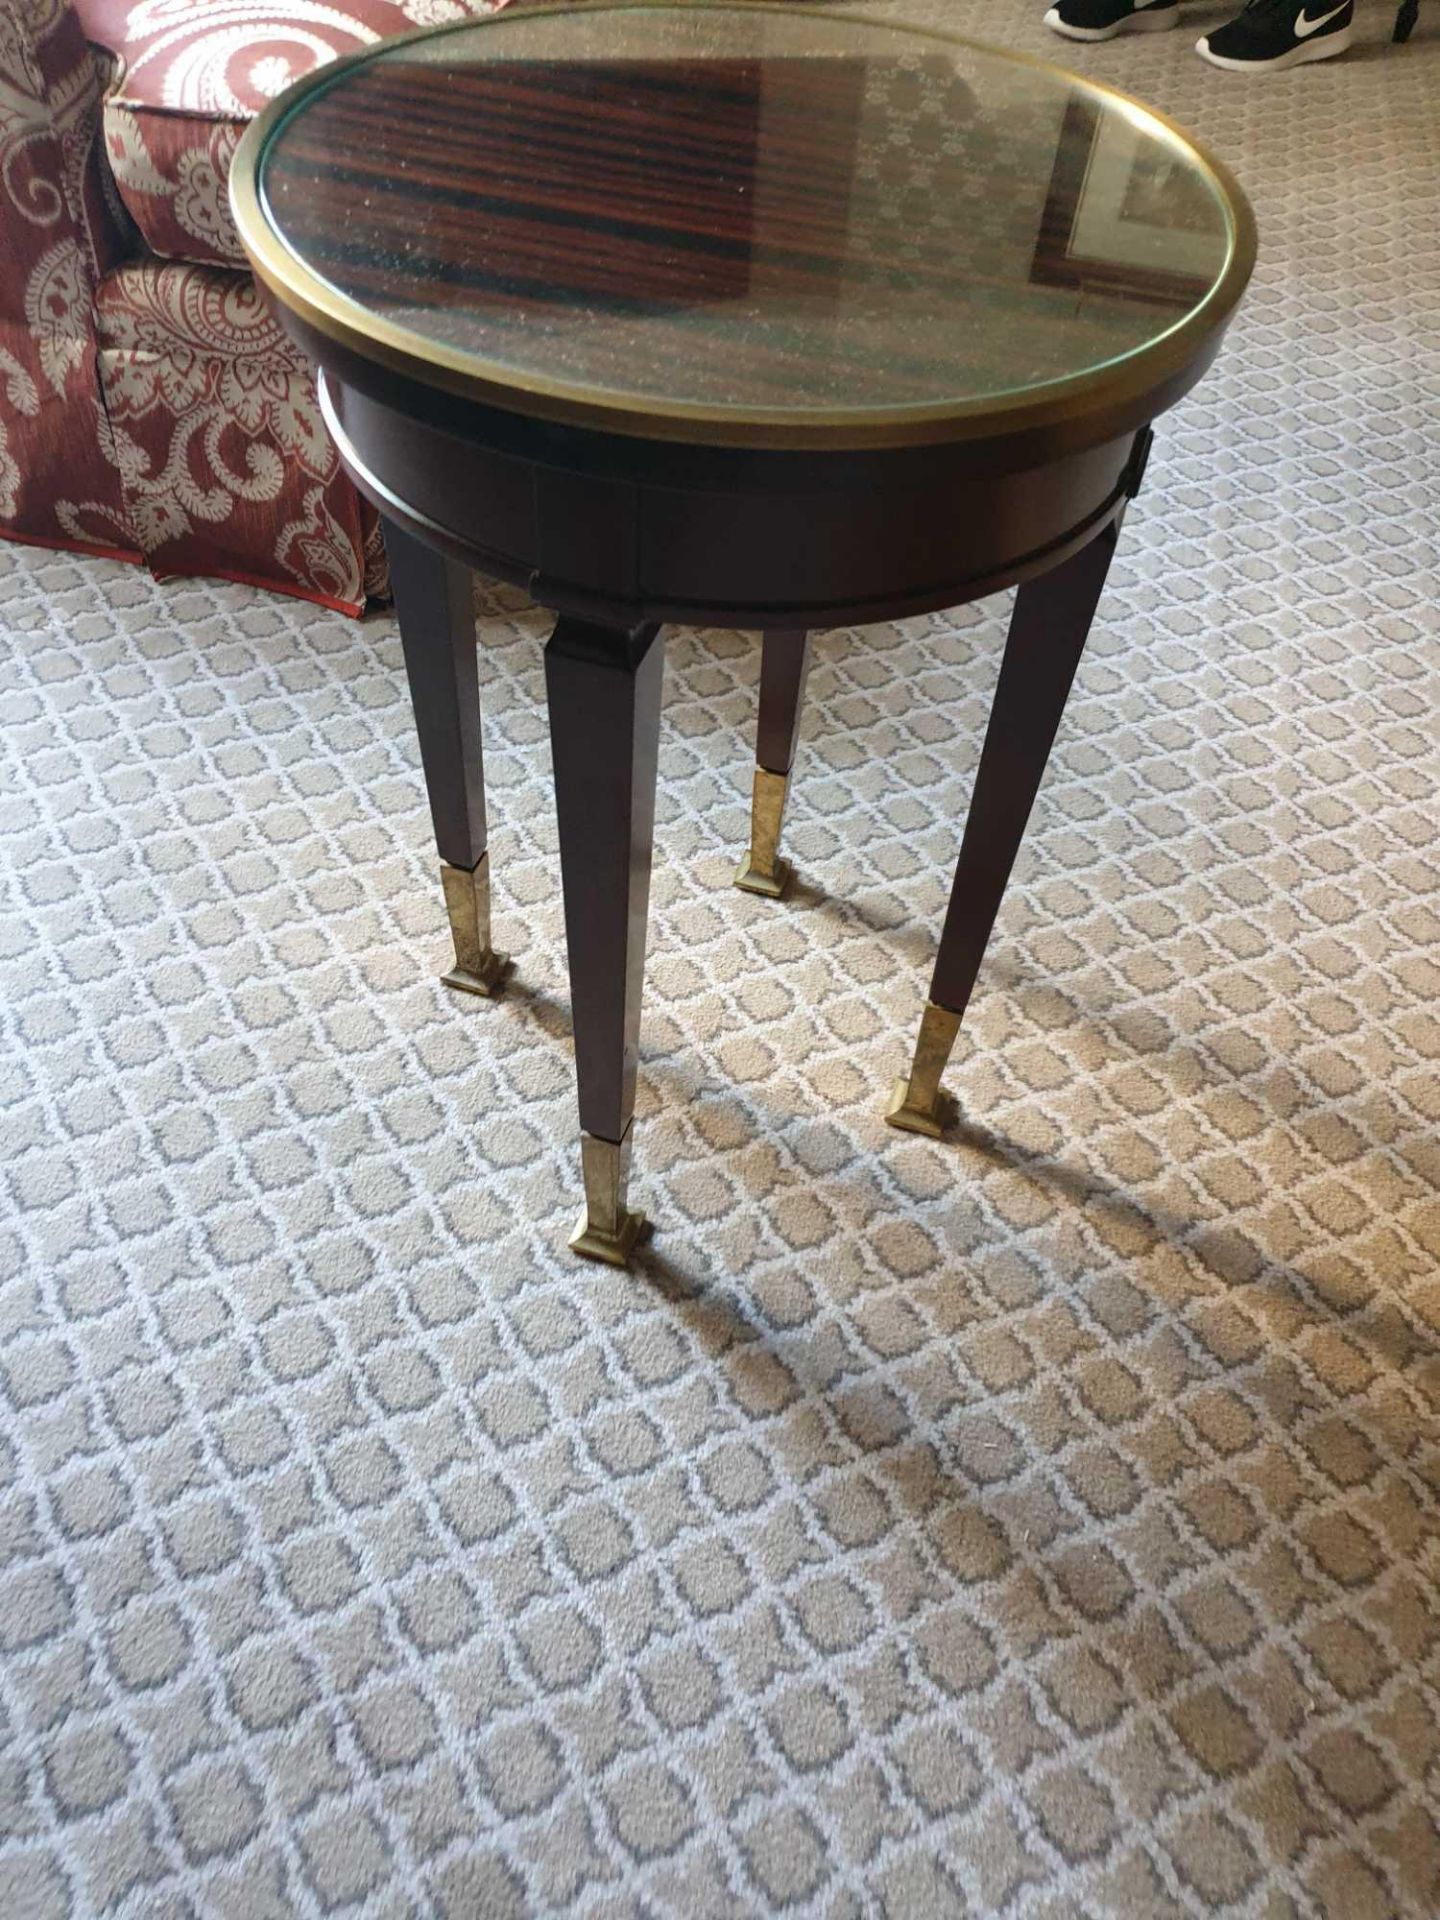 Circular Side Table With Antiqued Plate Top And Brass Trim Mounted On Tapering Legs With Brass - Image 3 of 3